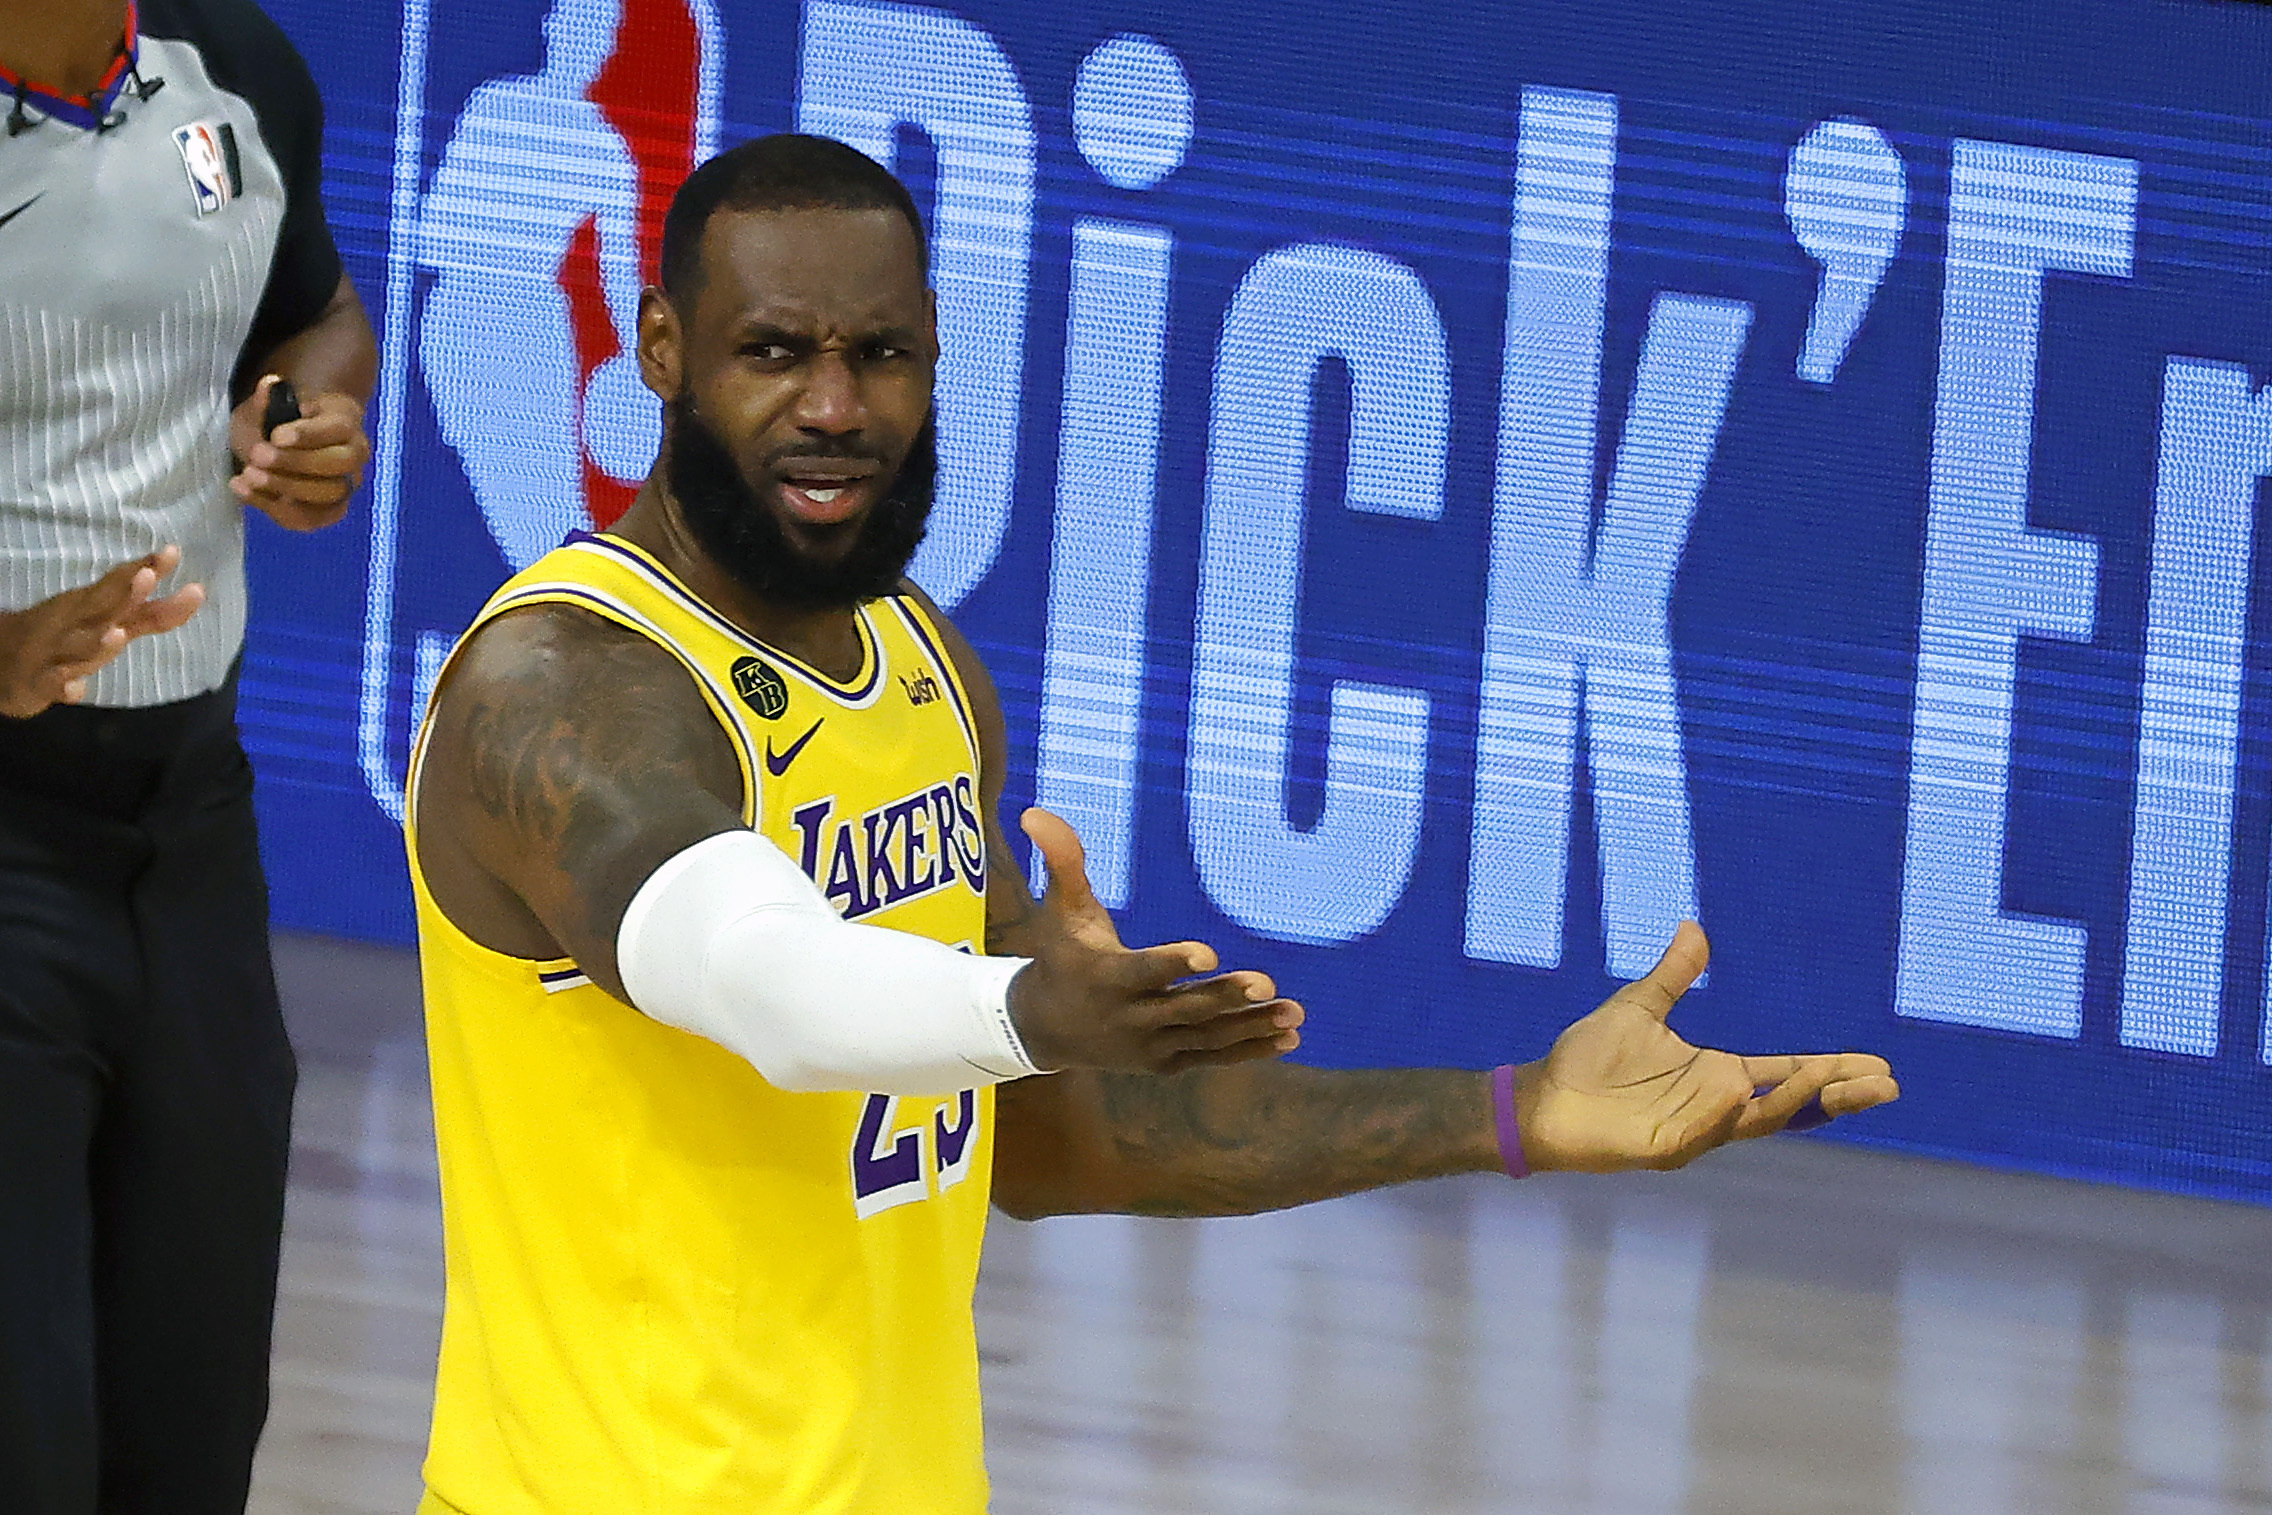 No One Has More To Lose On An NBA Reboot Than LeBron James